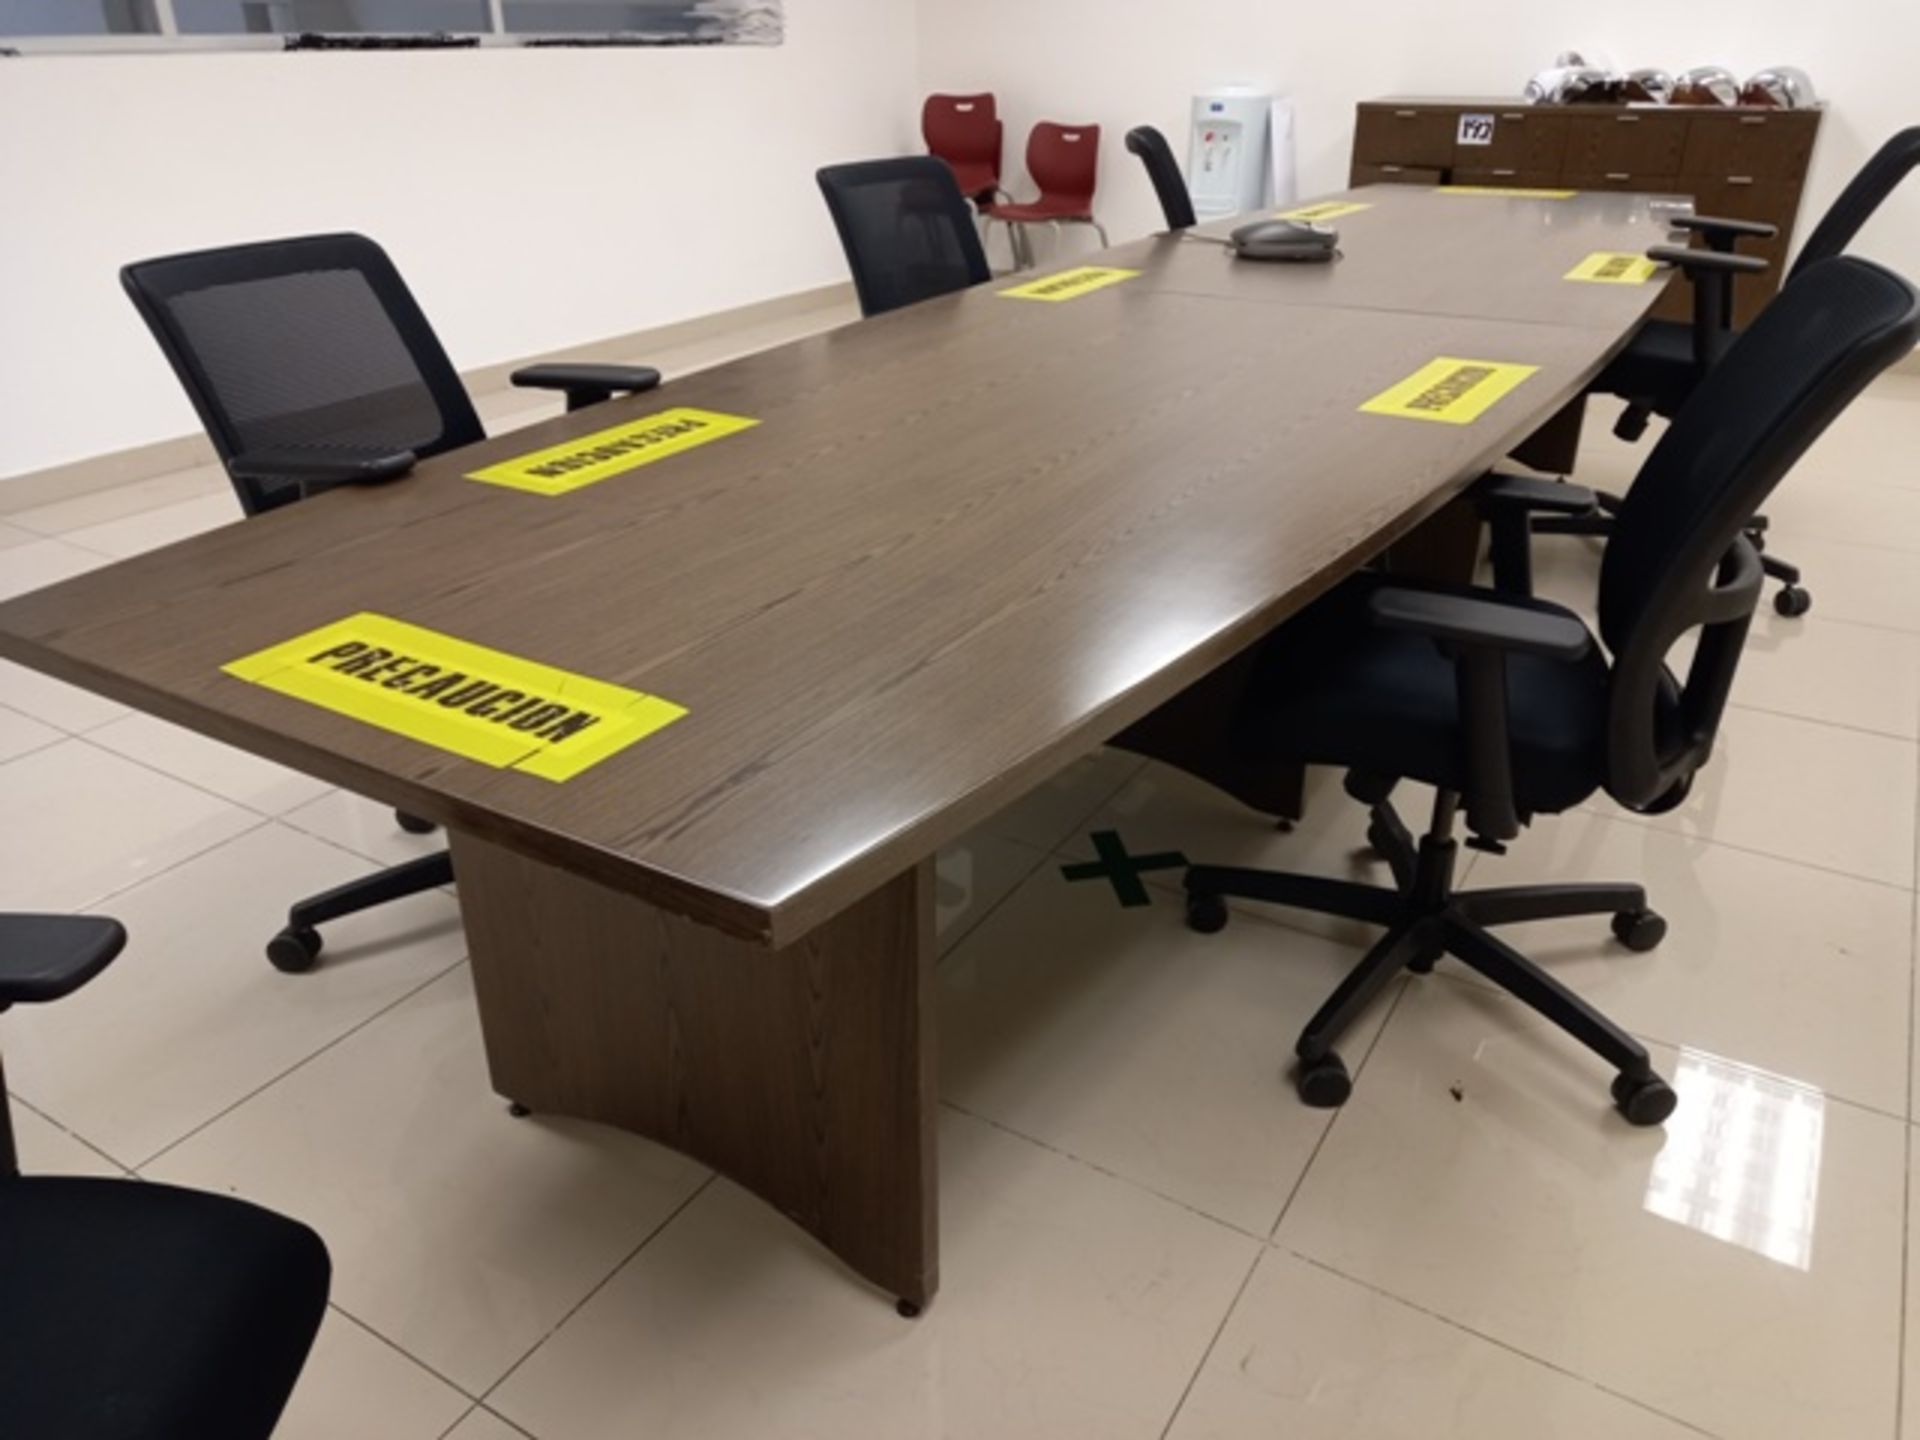 (16) Pcs Office Furniture Consisting Of: (1) 12 People Meeting Room Table, (6) Swivel, and more - Image 4 of 18